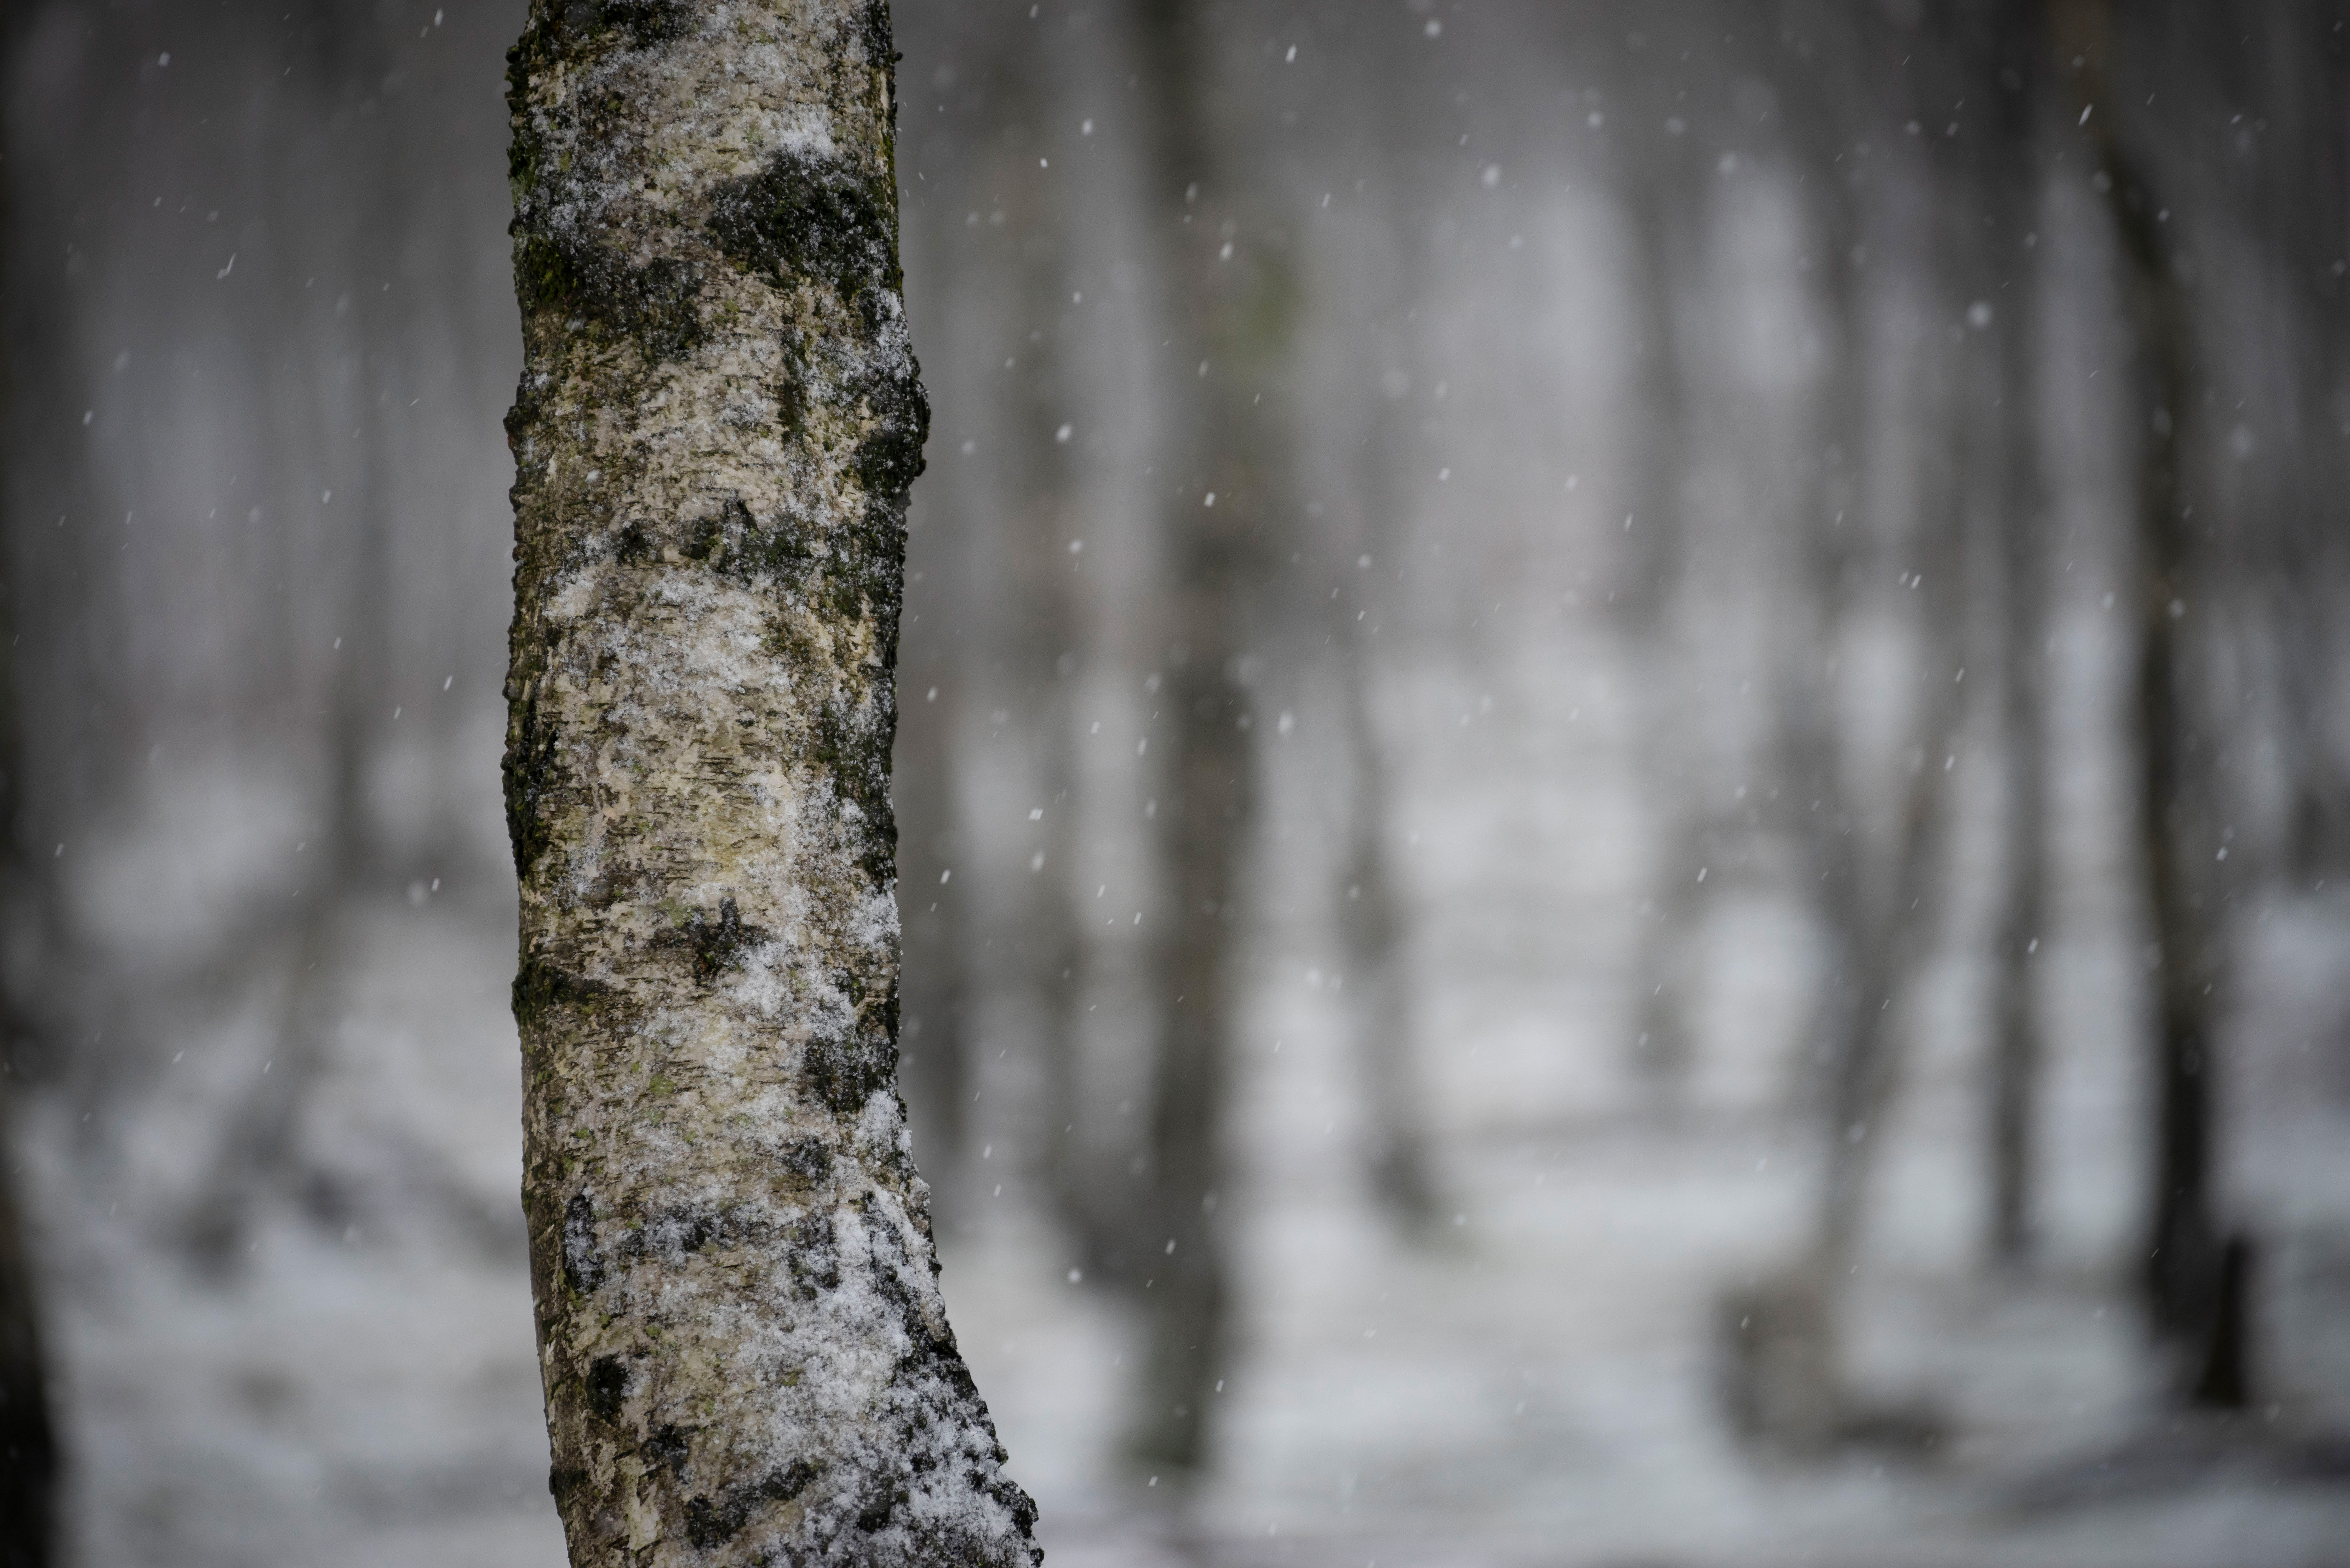 Birch Tree, Tamron 35-150mm with Sony A7 IV, 1/500s, f/2.8, ISO400, 150mm